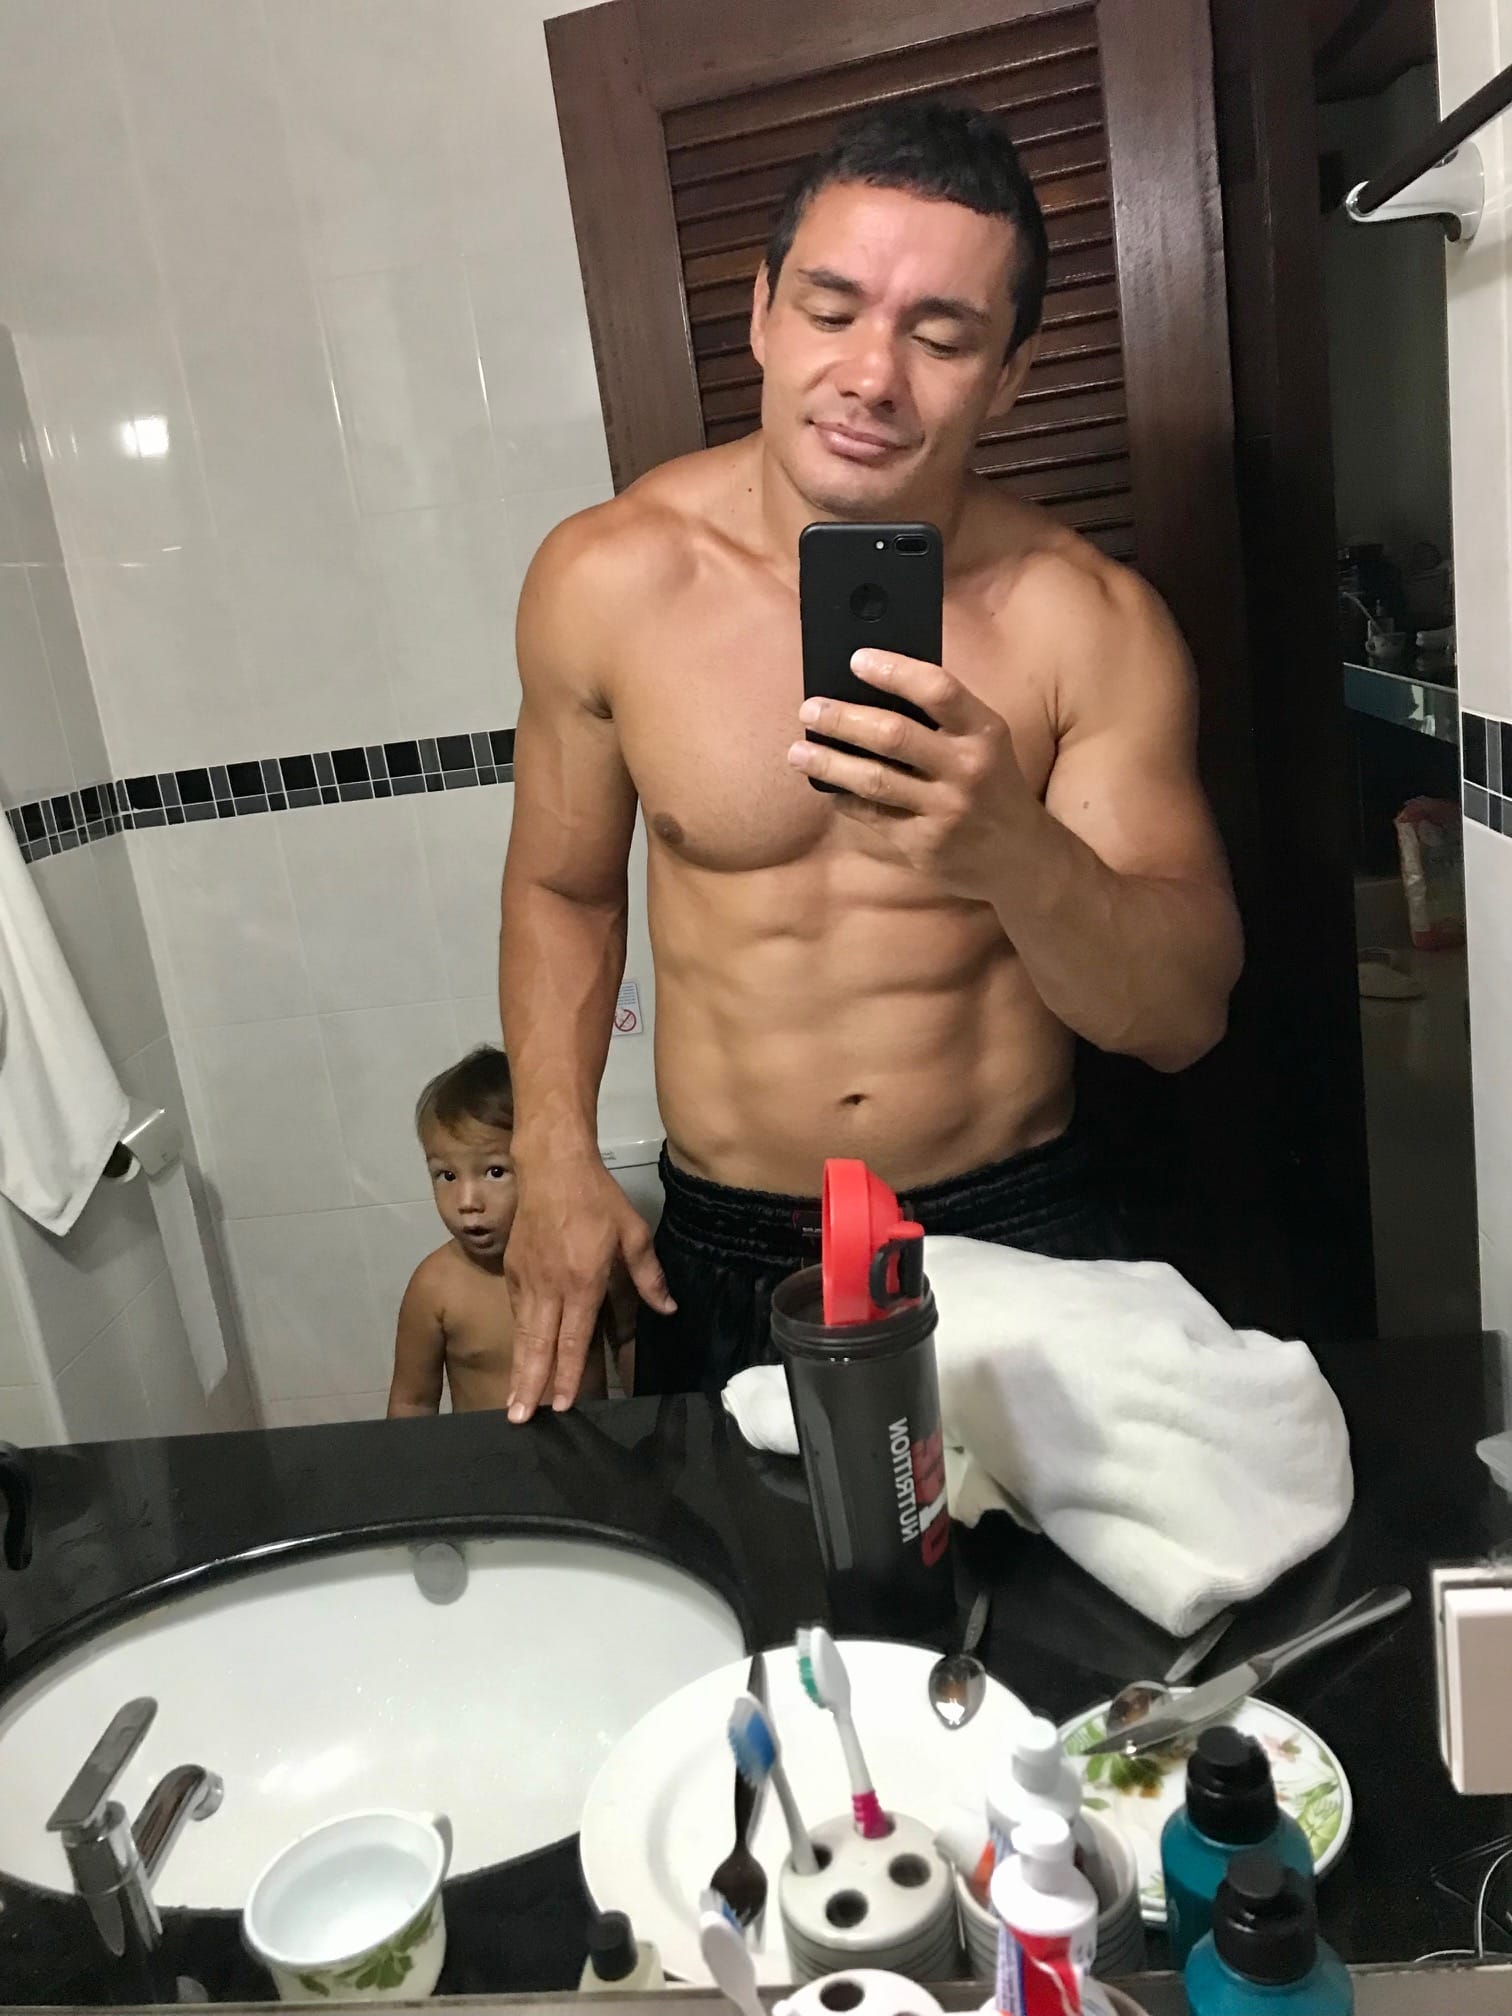 A shirtless man taking a mirror selfie in a bathroom with a small child peeking out from behind him Various toiletries and personal items are on the countertop